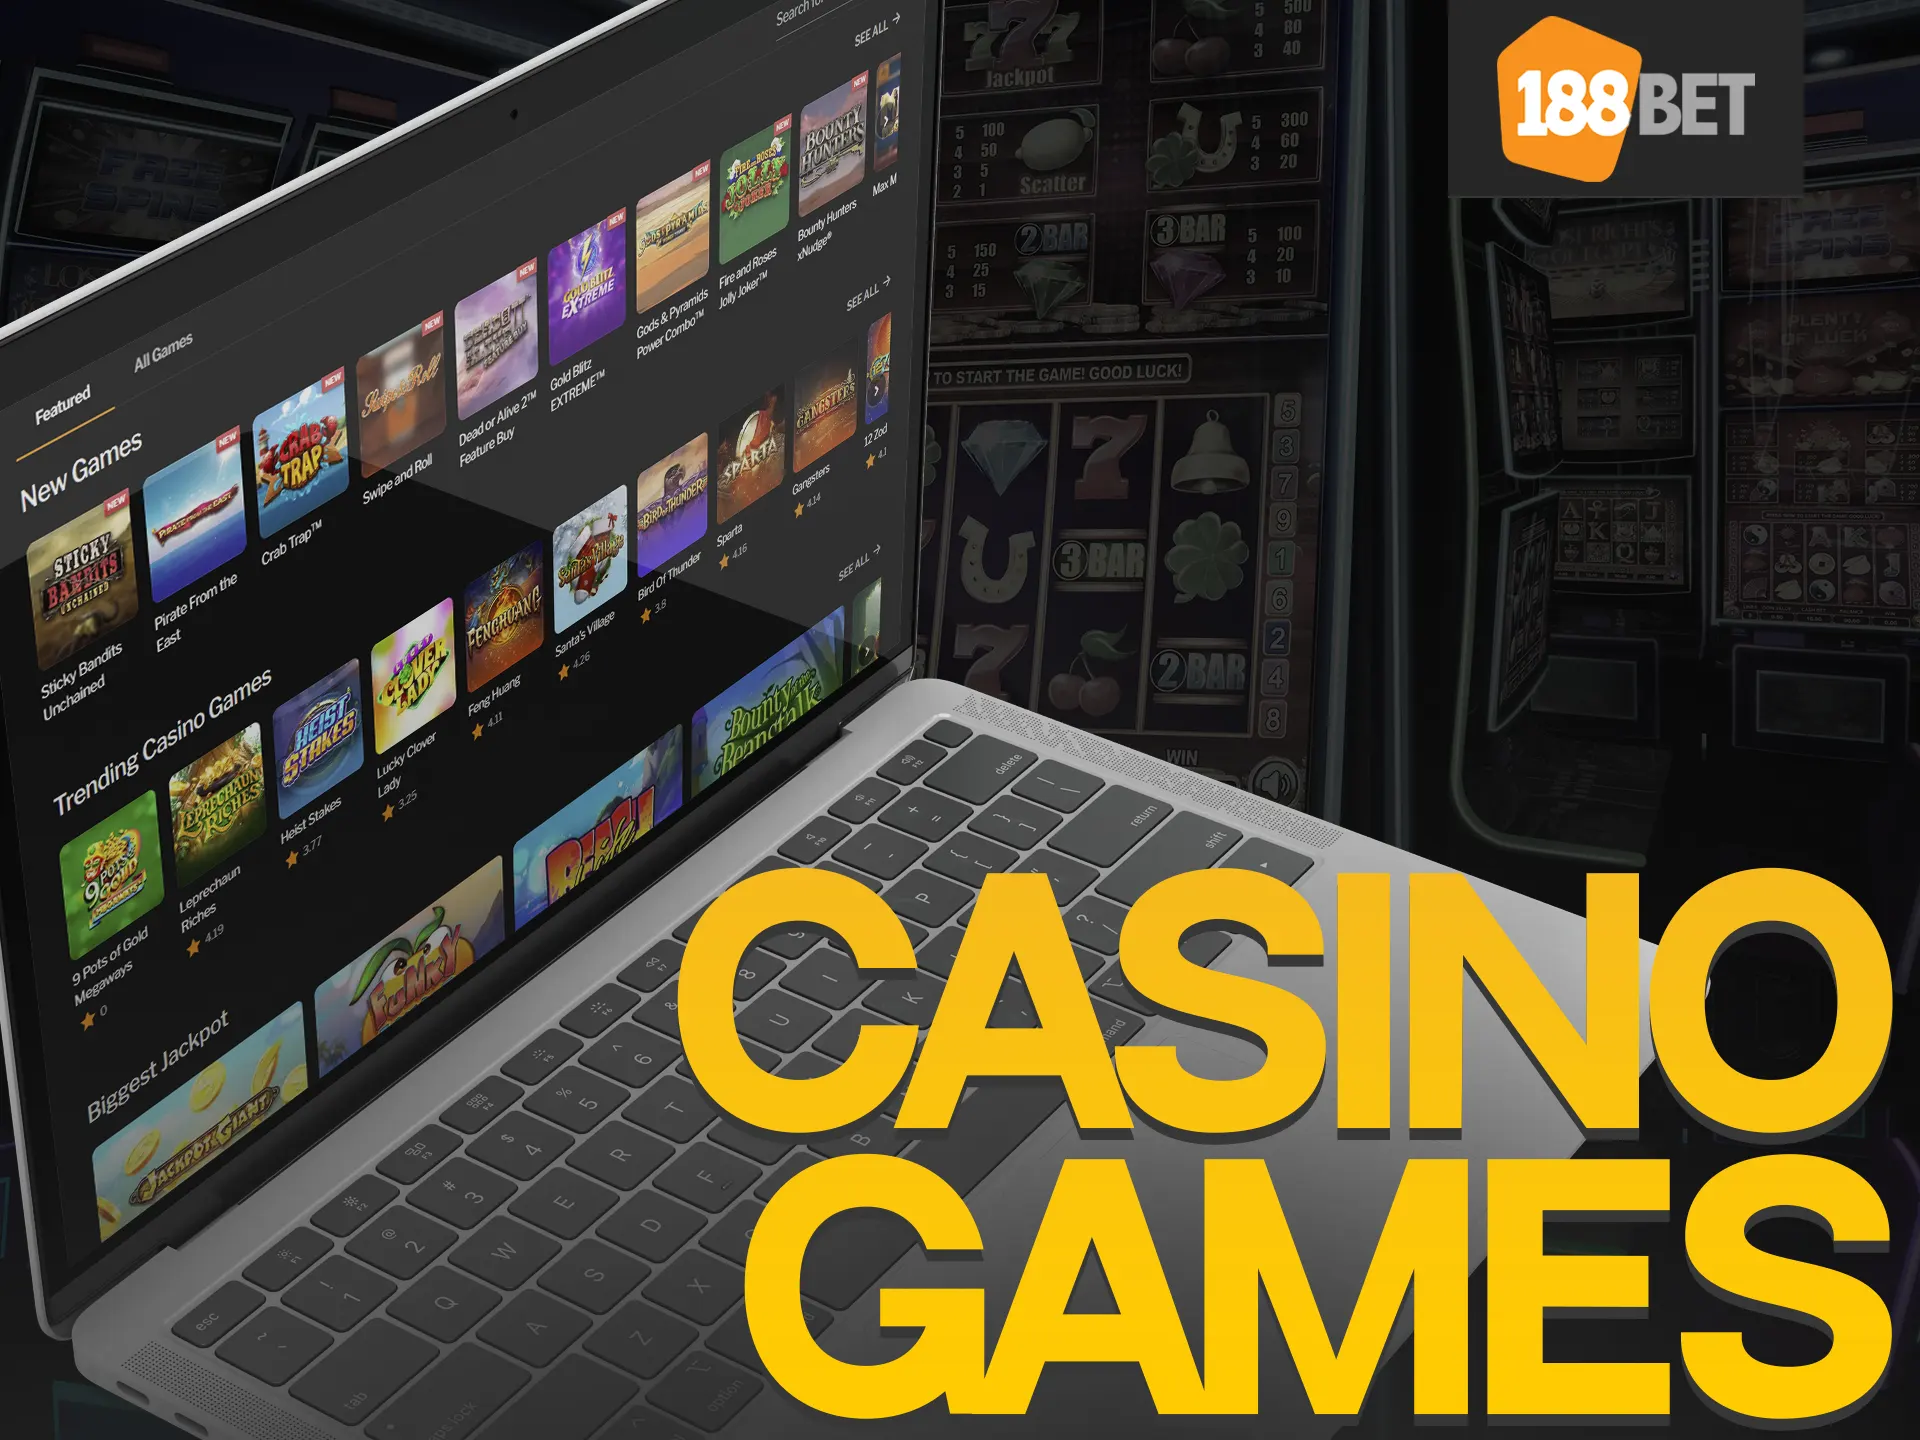 Check out the most popular 188bet casino games.